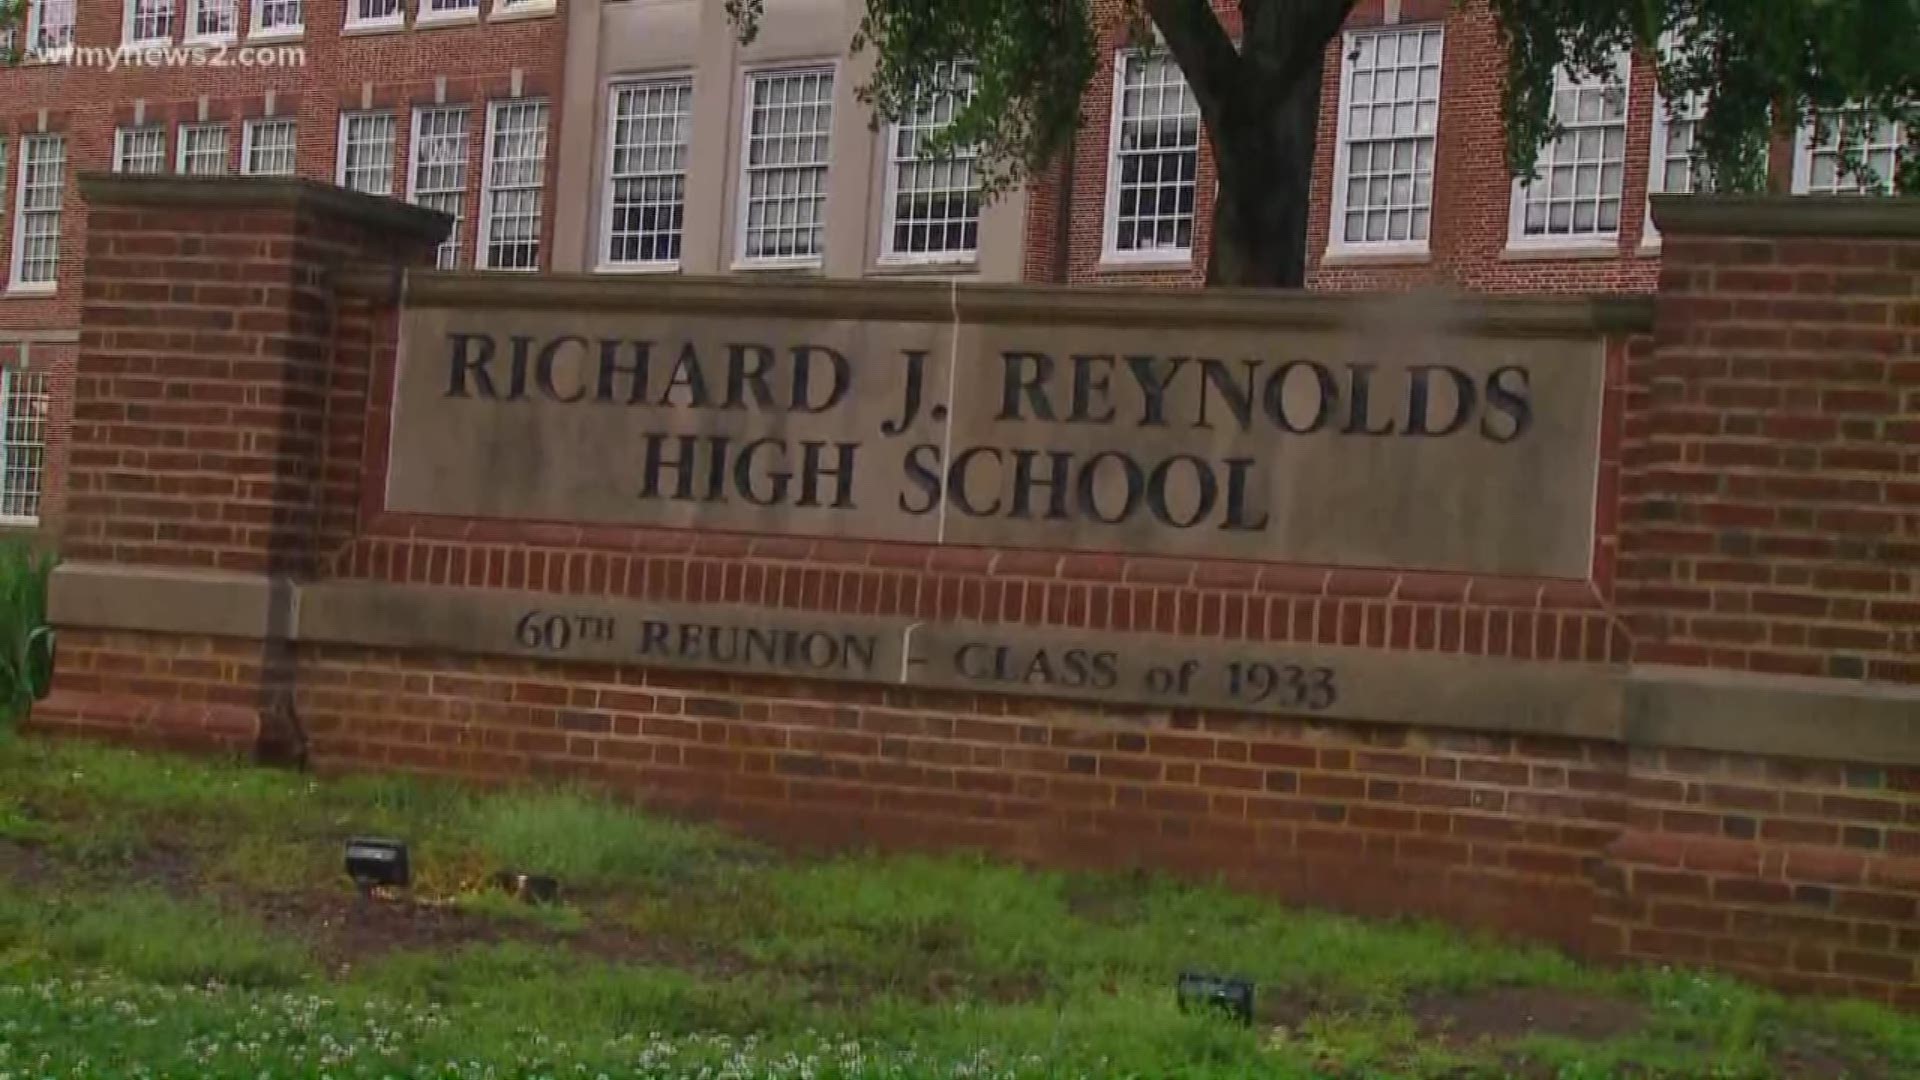 RJ Reynolds High School is on alert Monday morning after threats were made on social media over the weekend.